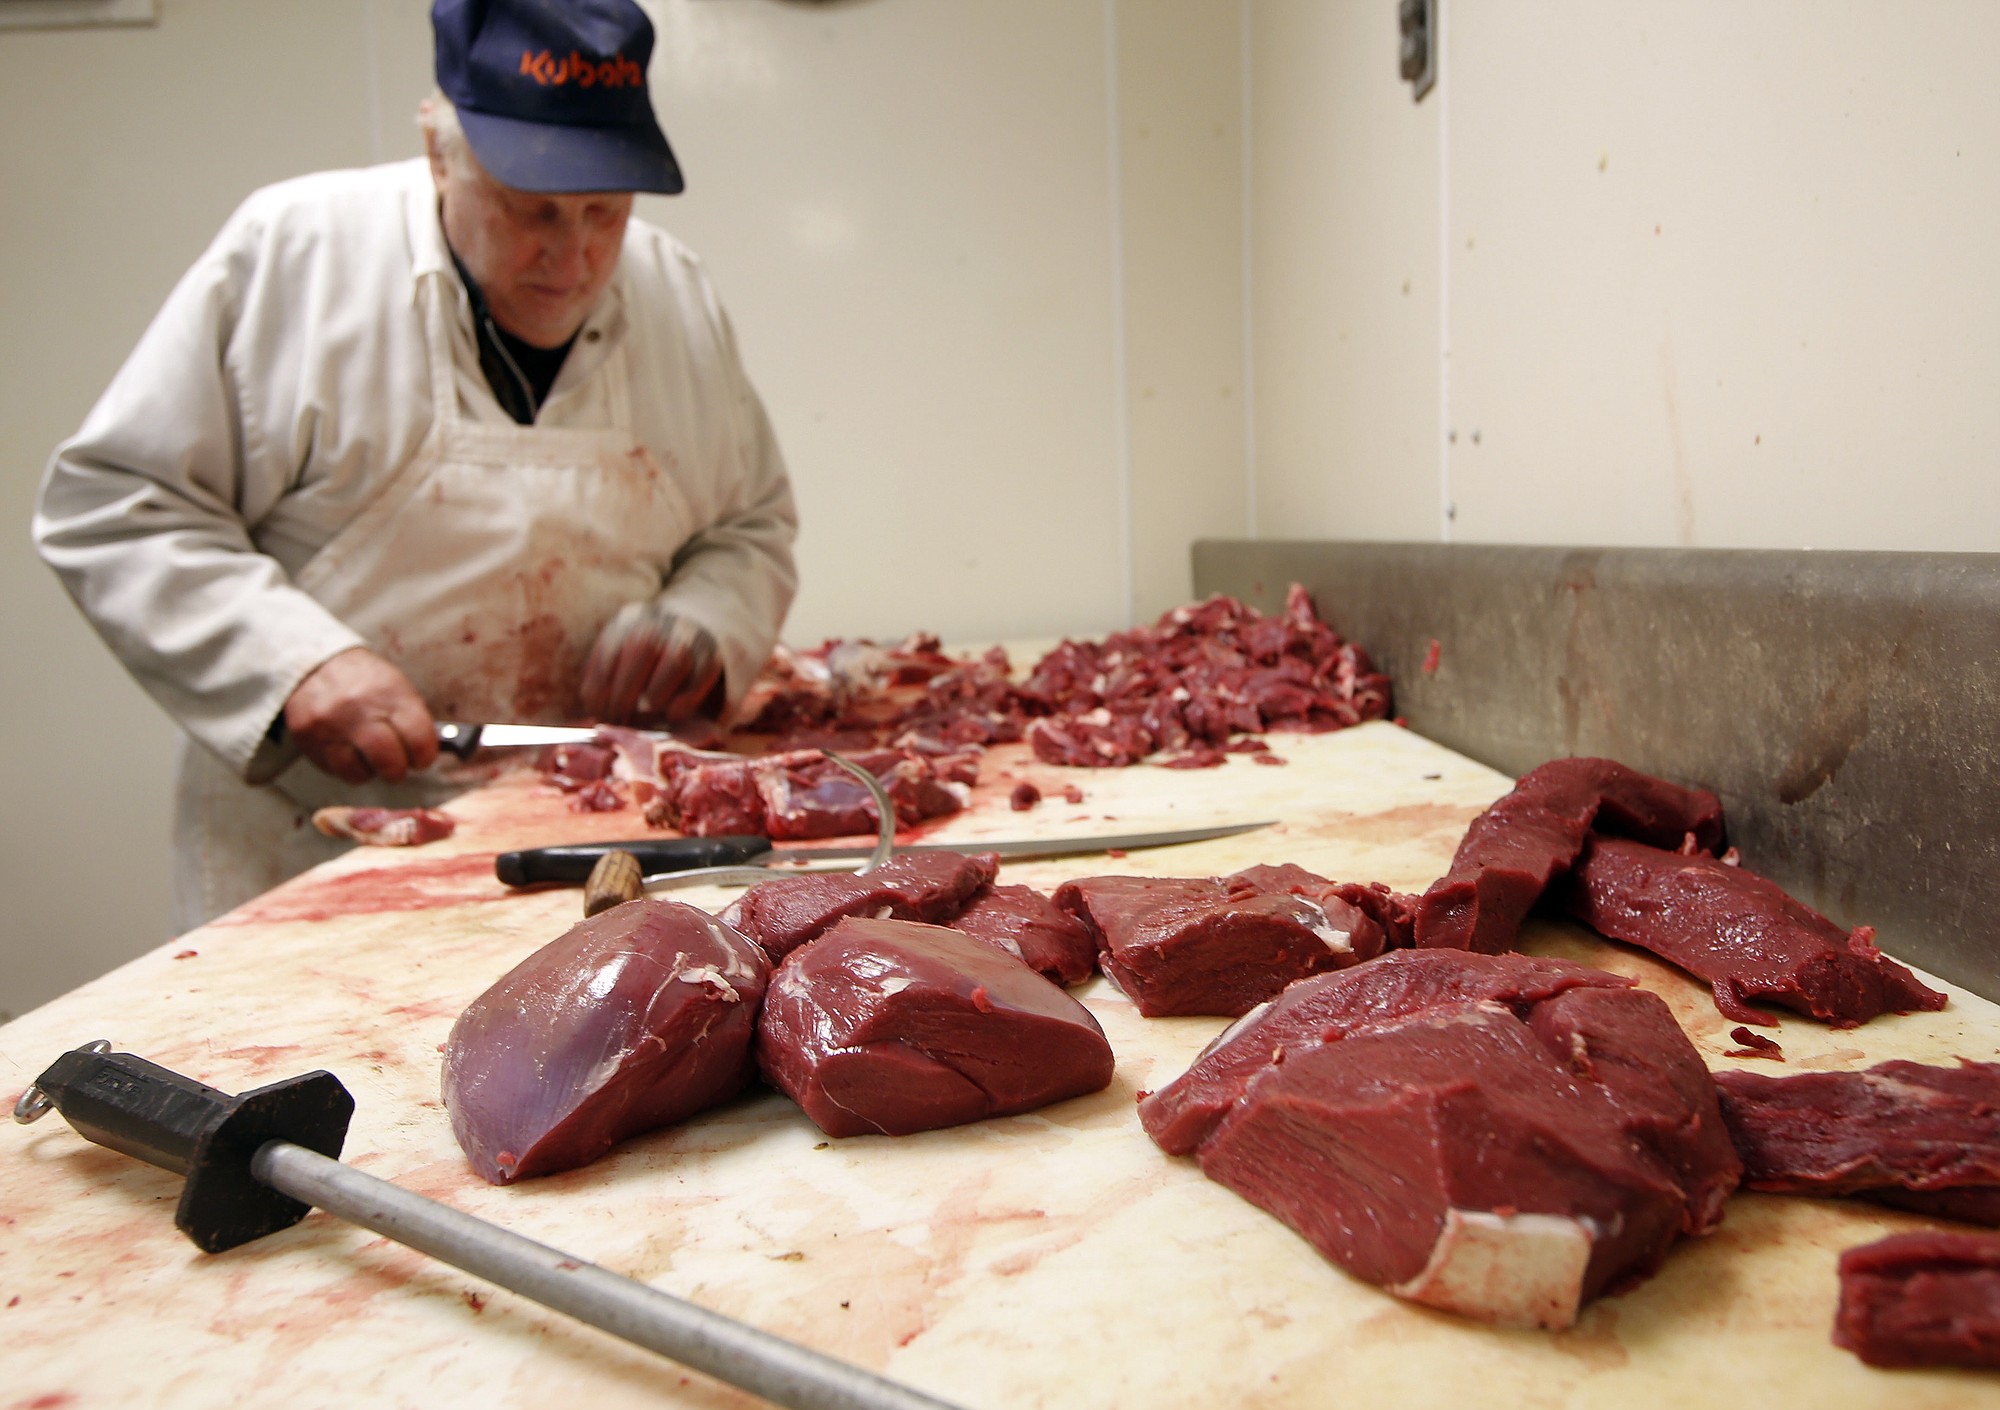 Veteran meat-cutter Everett Gage cuts steaks and roasts from deer Monday following the first weekend of the deer rifle season in Loudon, N.H.